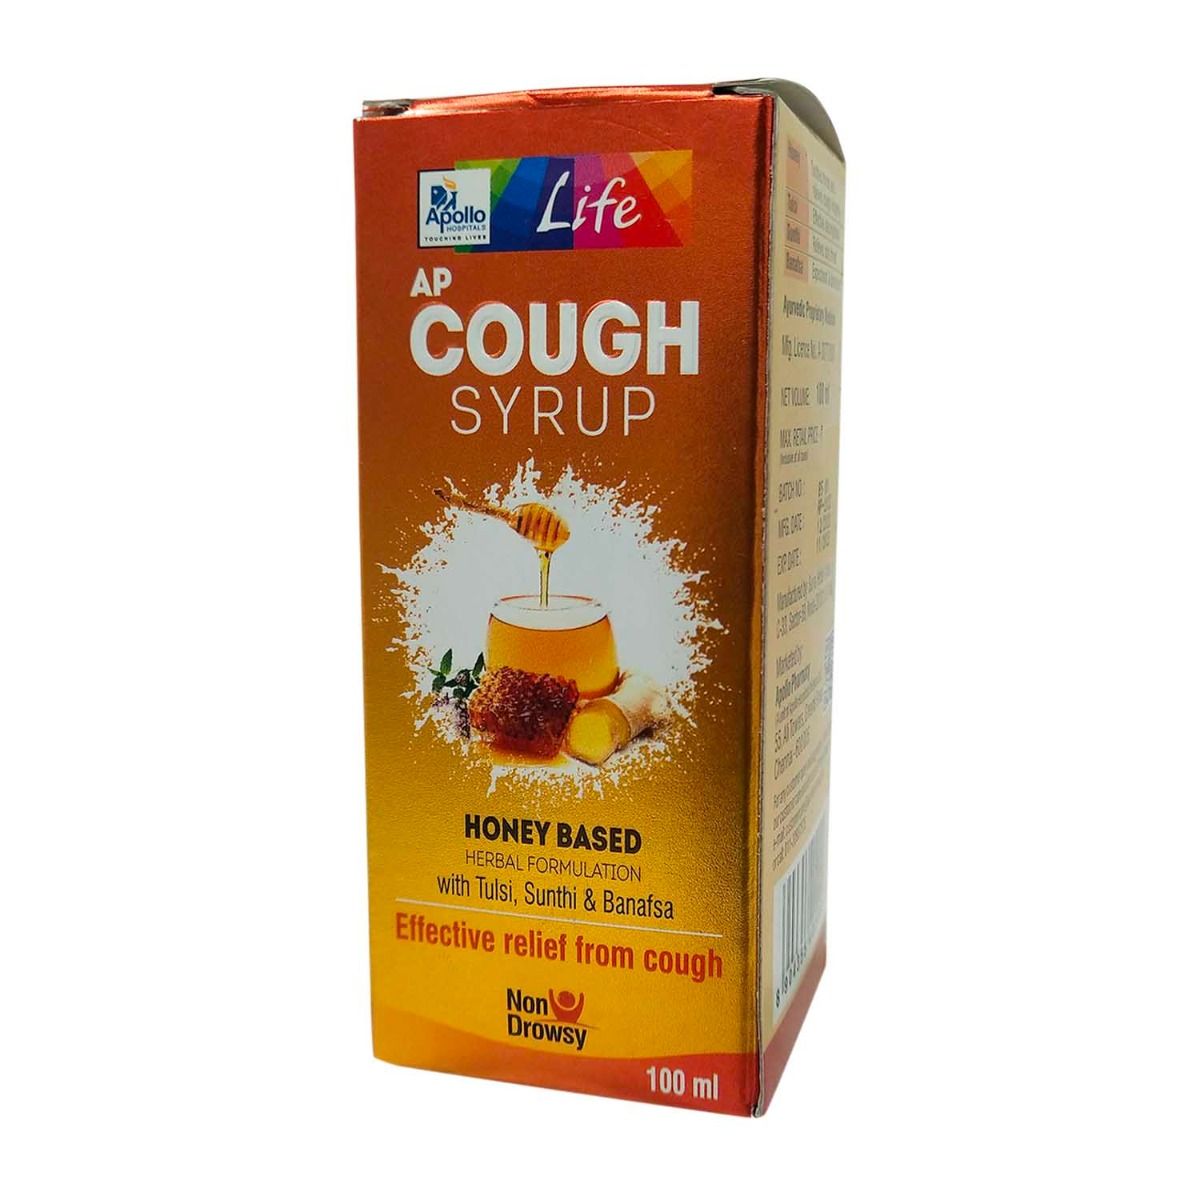 Apollo Pharmacy Non Drowsy Cough Syrup, 100 ml, Pack of 1 